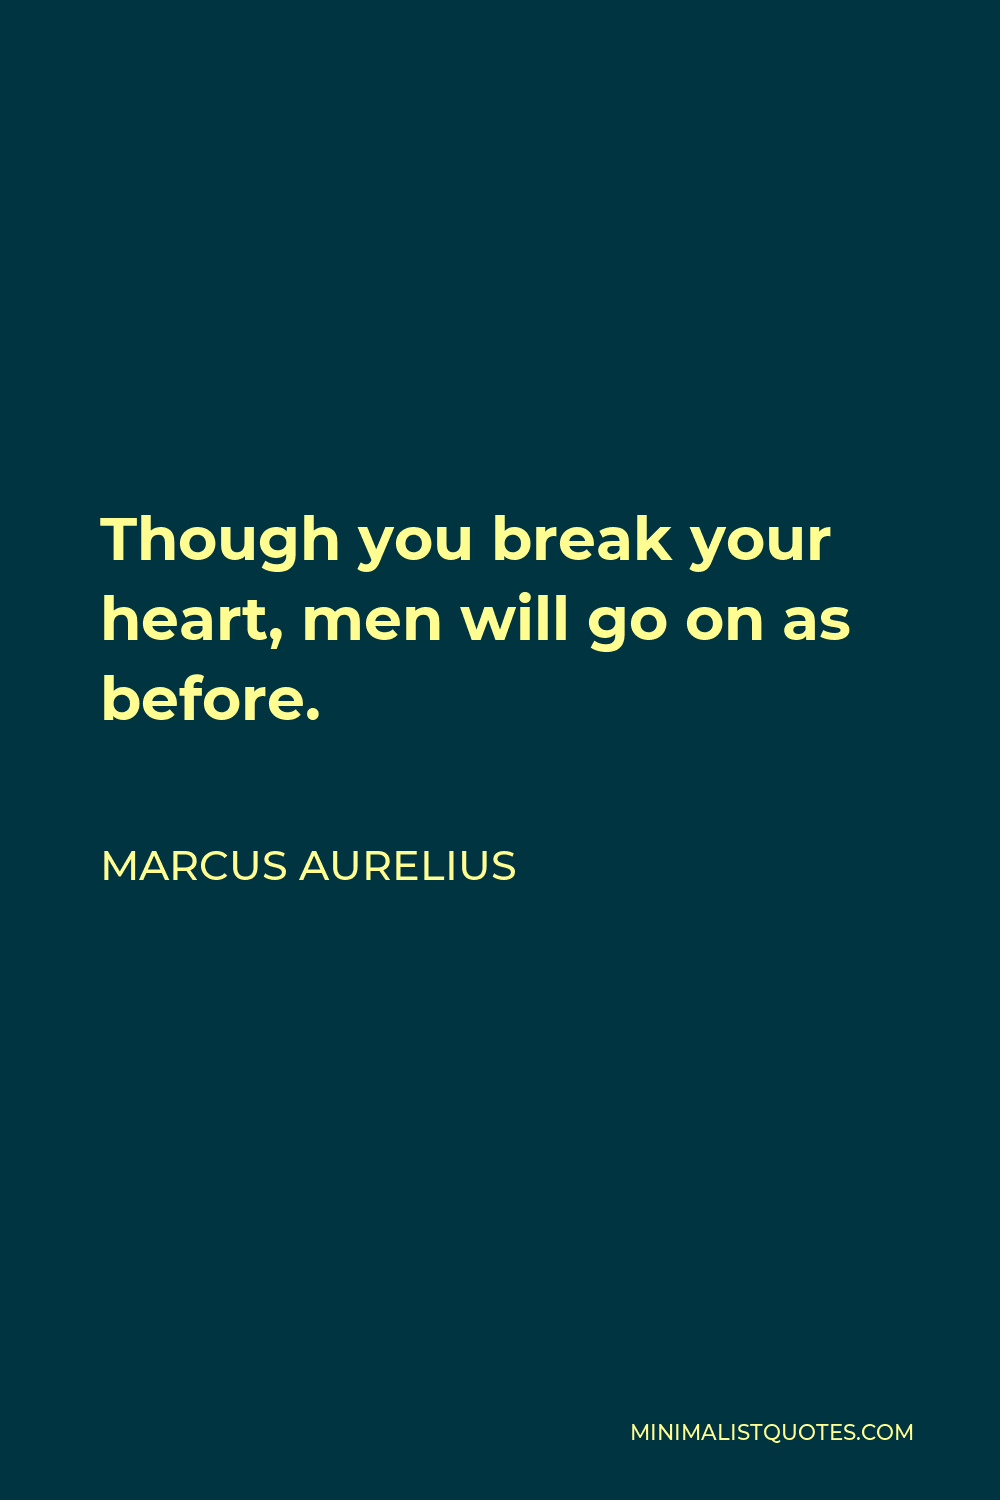 Marcus Aurelius Quote - Though you break your heart, men will go on as before.